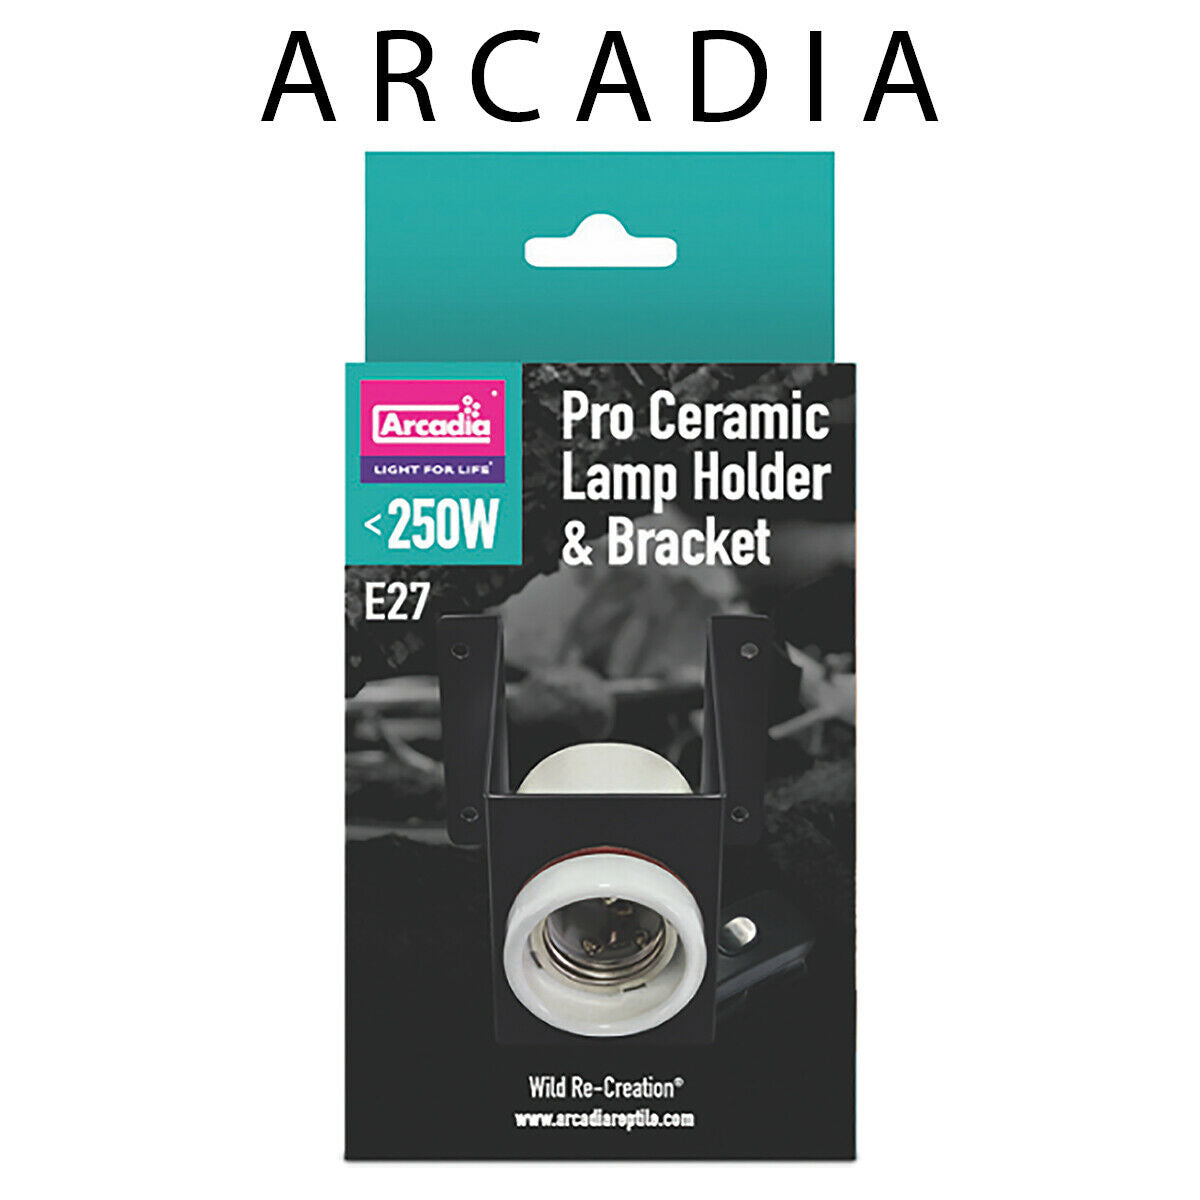 Arcadia Ceramic Lamp Holder And Bracket Pro with Integral On/Off Power Switch